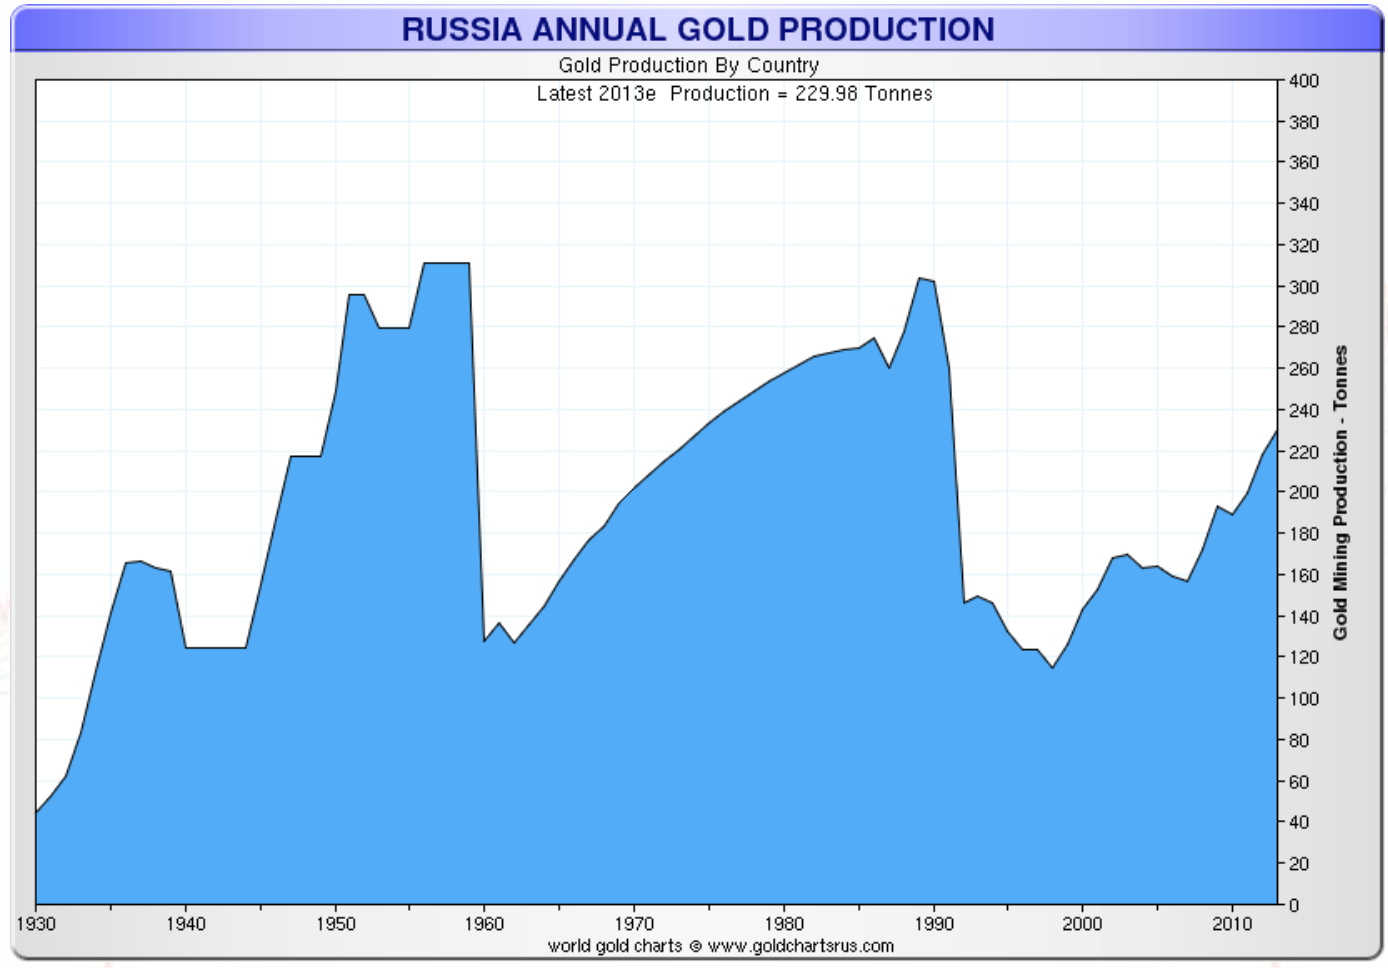 Russian annual gold production